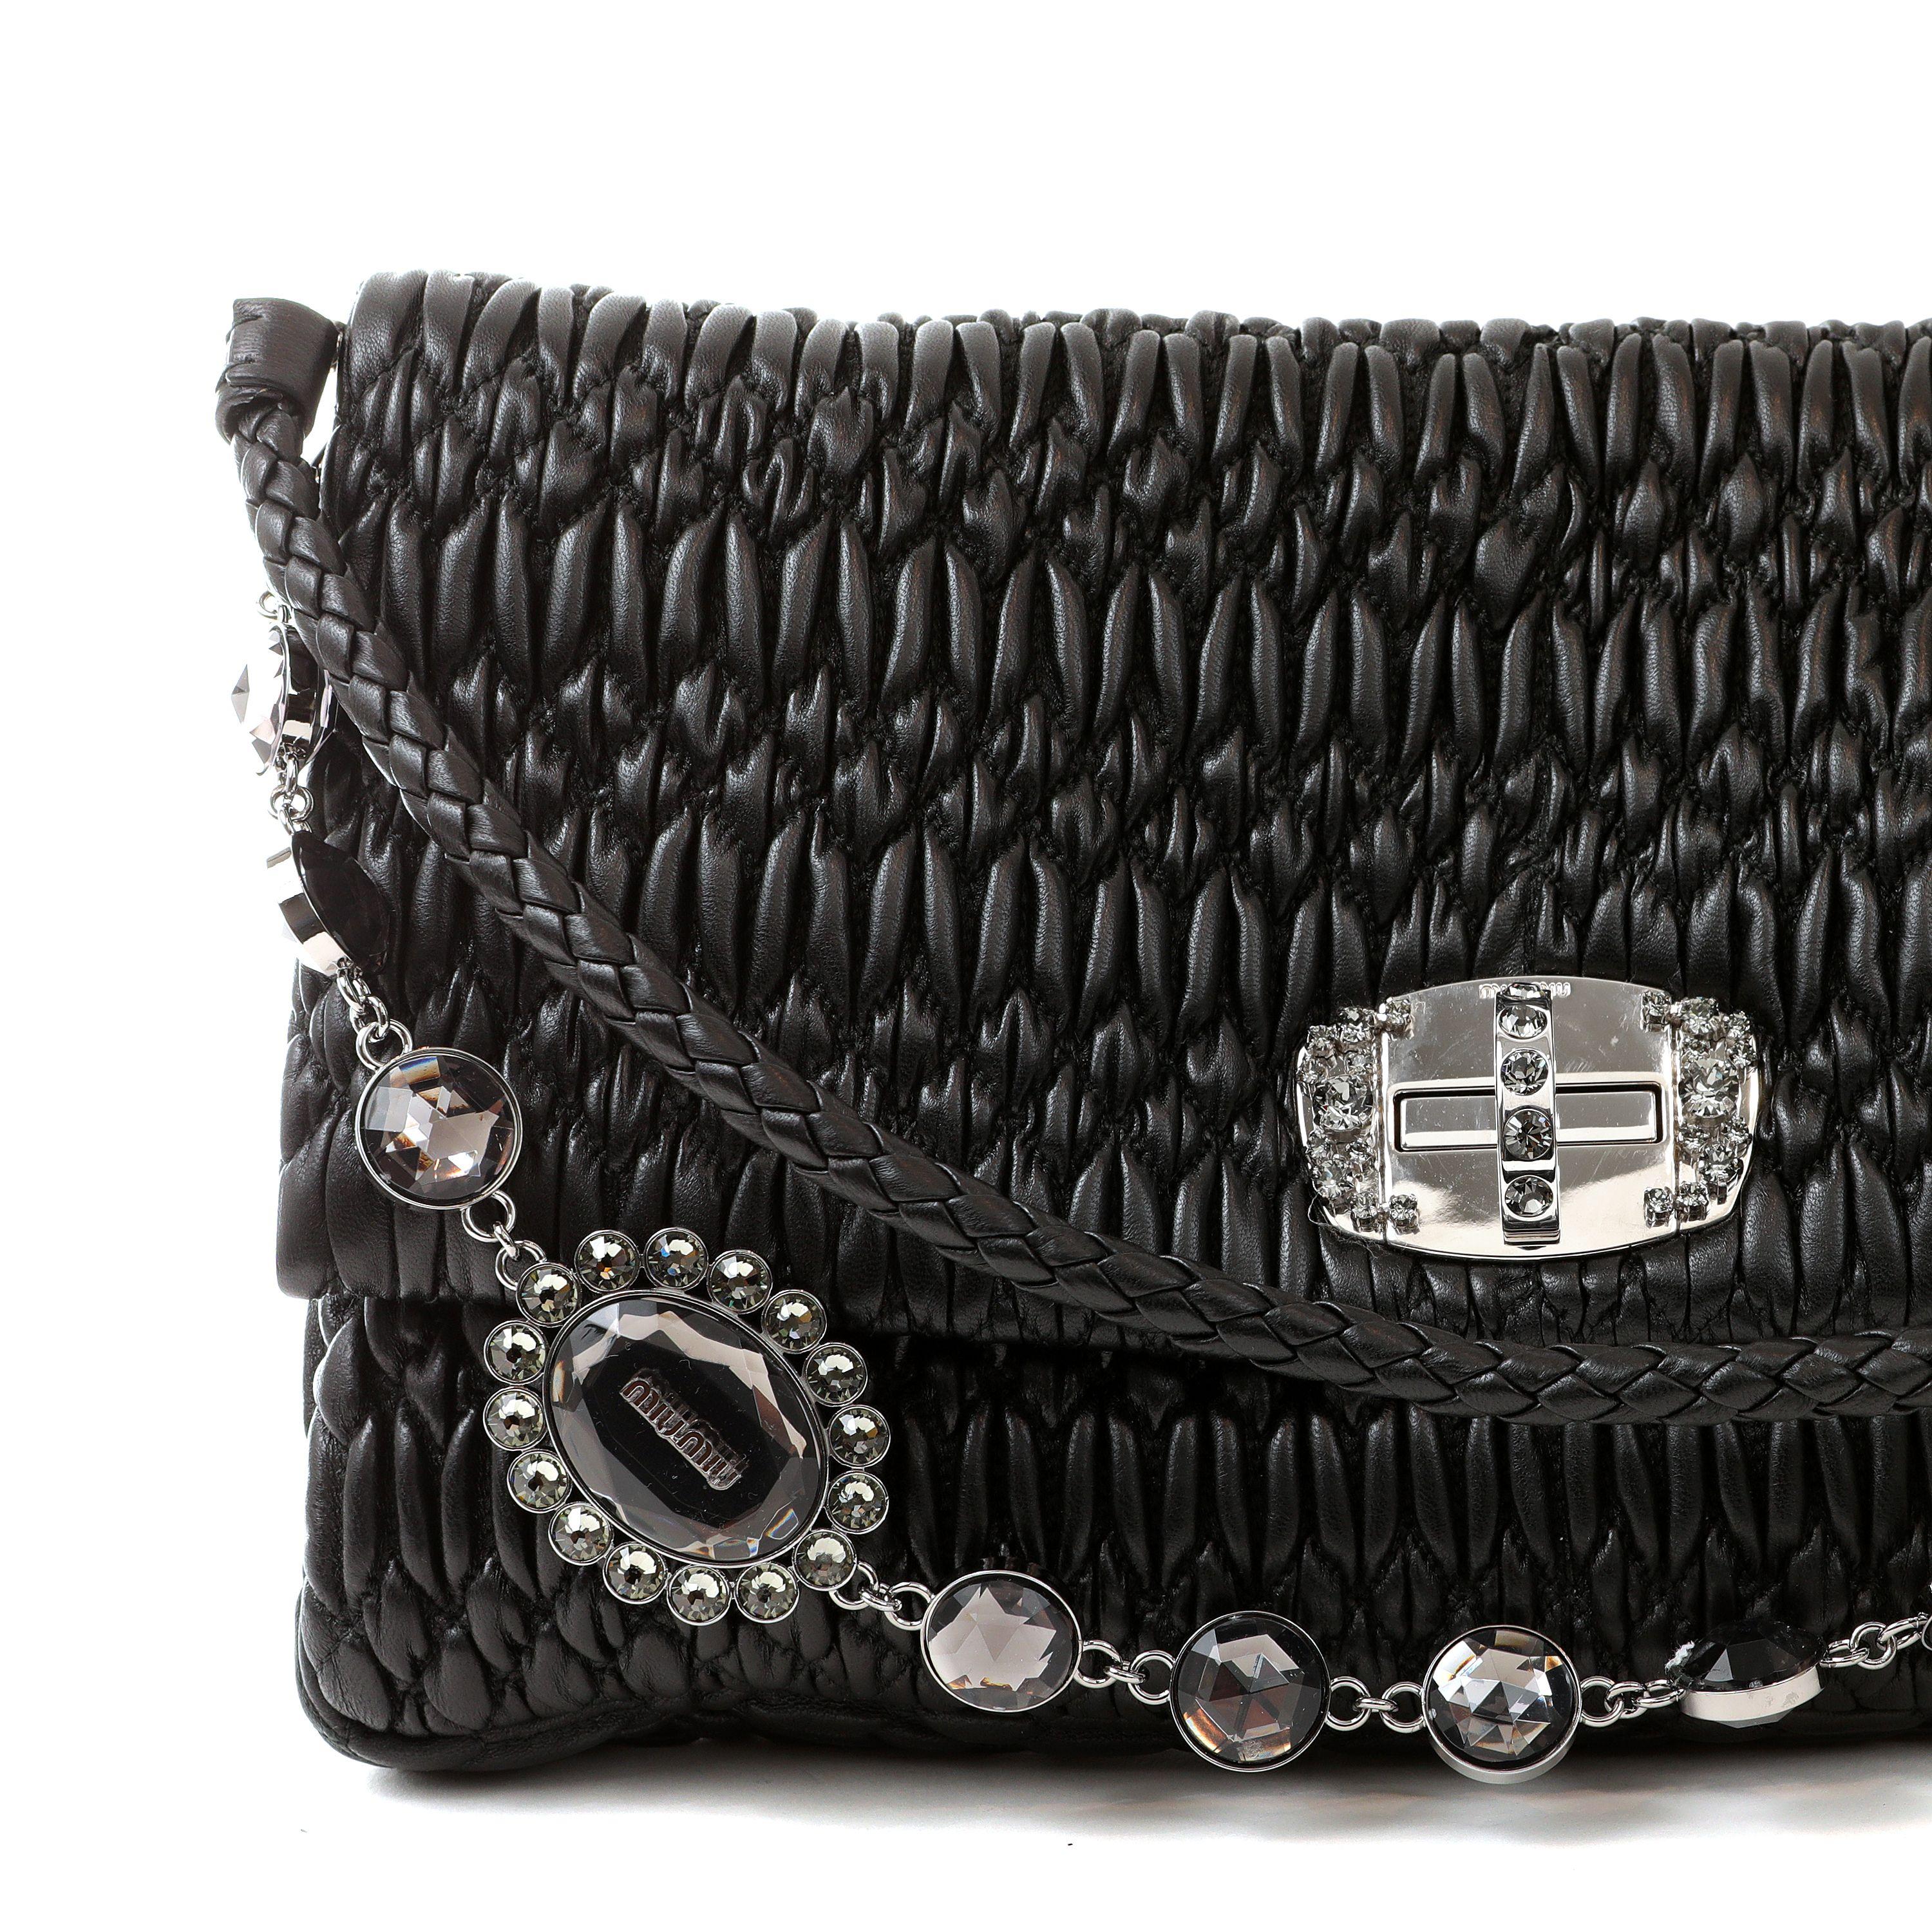 Miu Miu Black Crystal Cloquè Large Bag with Silver Hardware In Excellent Condition For Sale In Palm Beach, FL